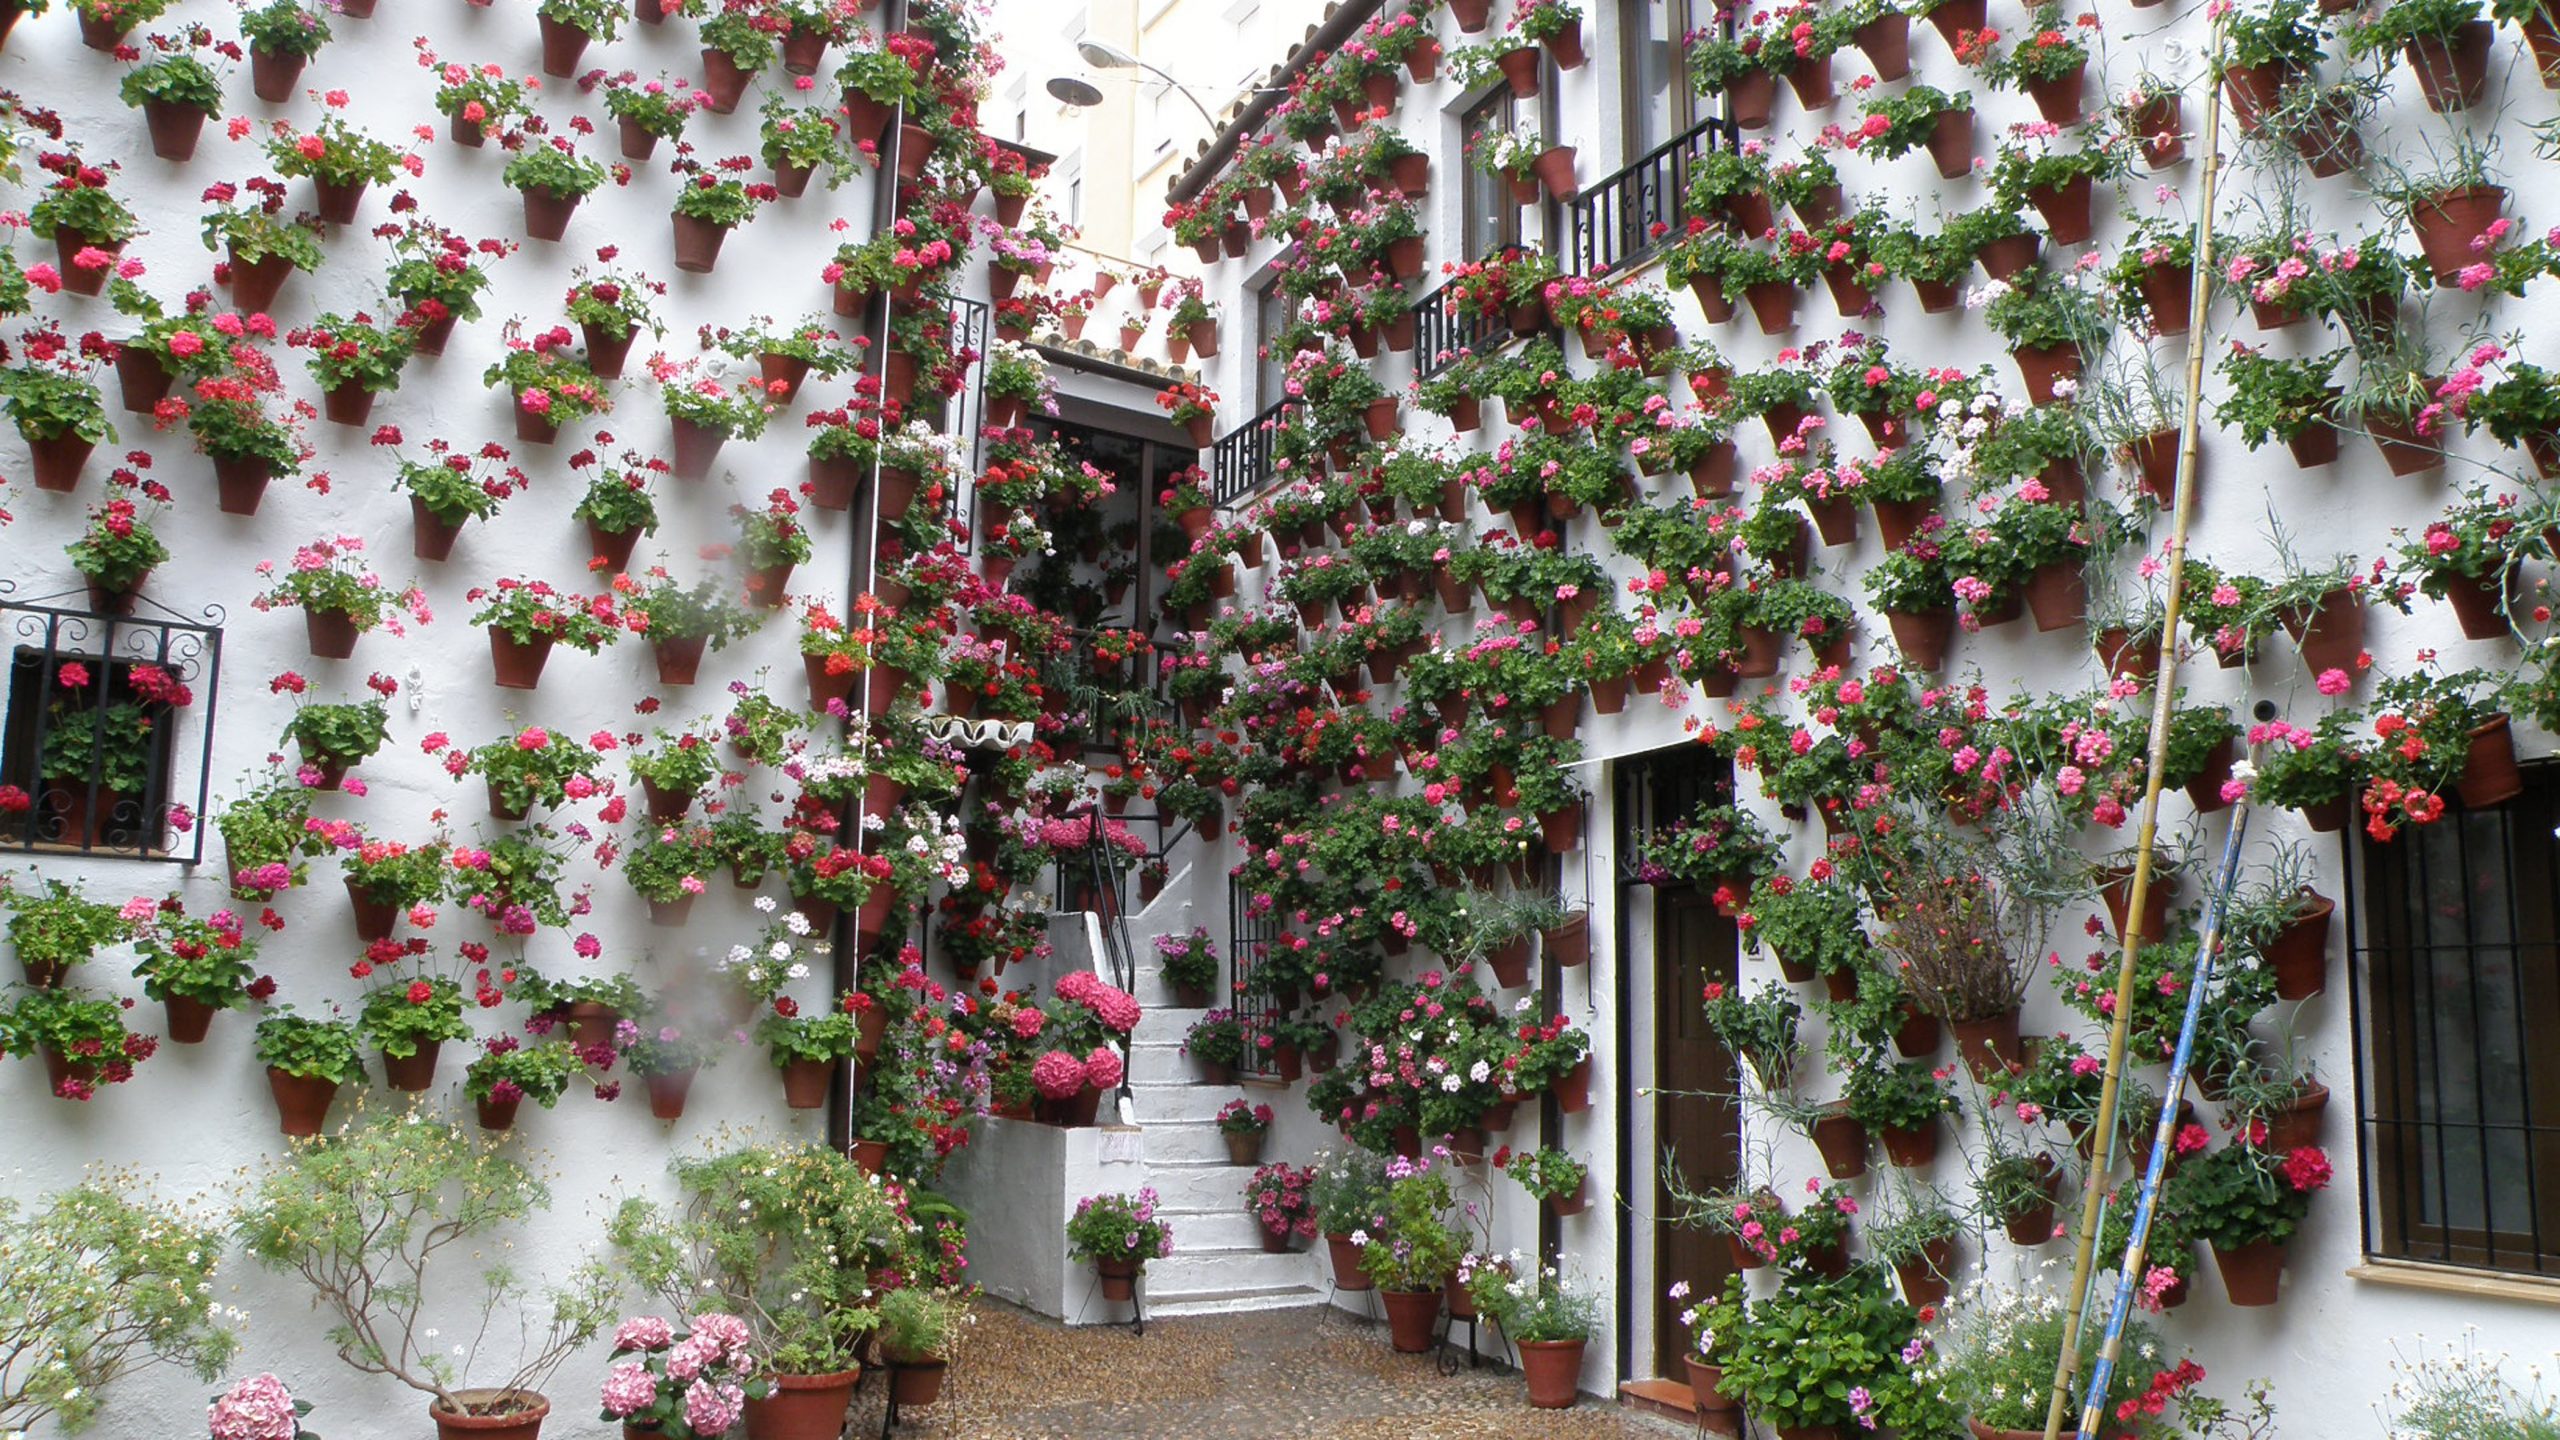 Decorated patios during spring in Spain